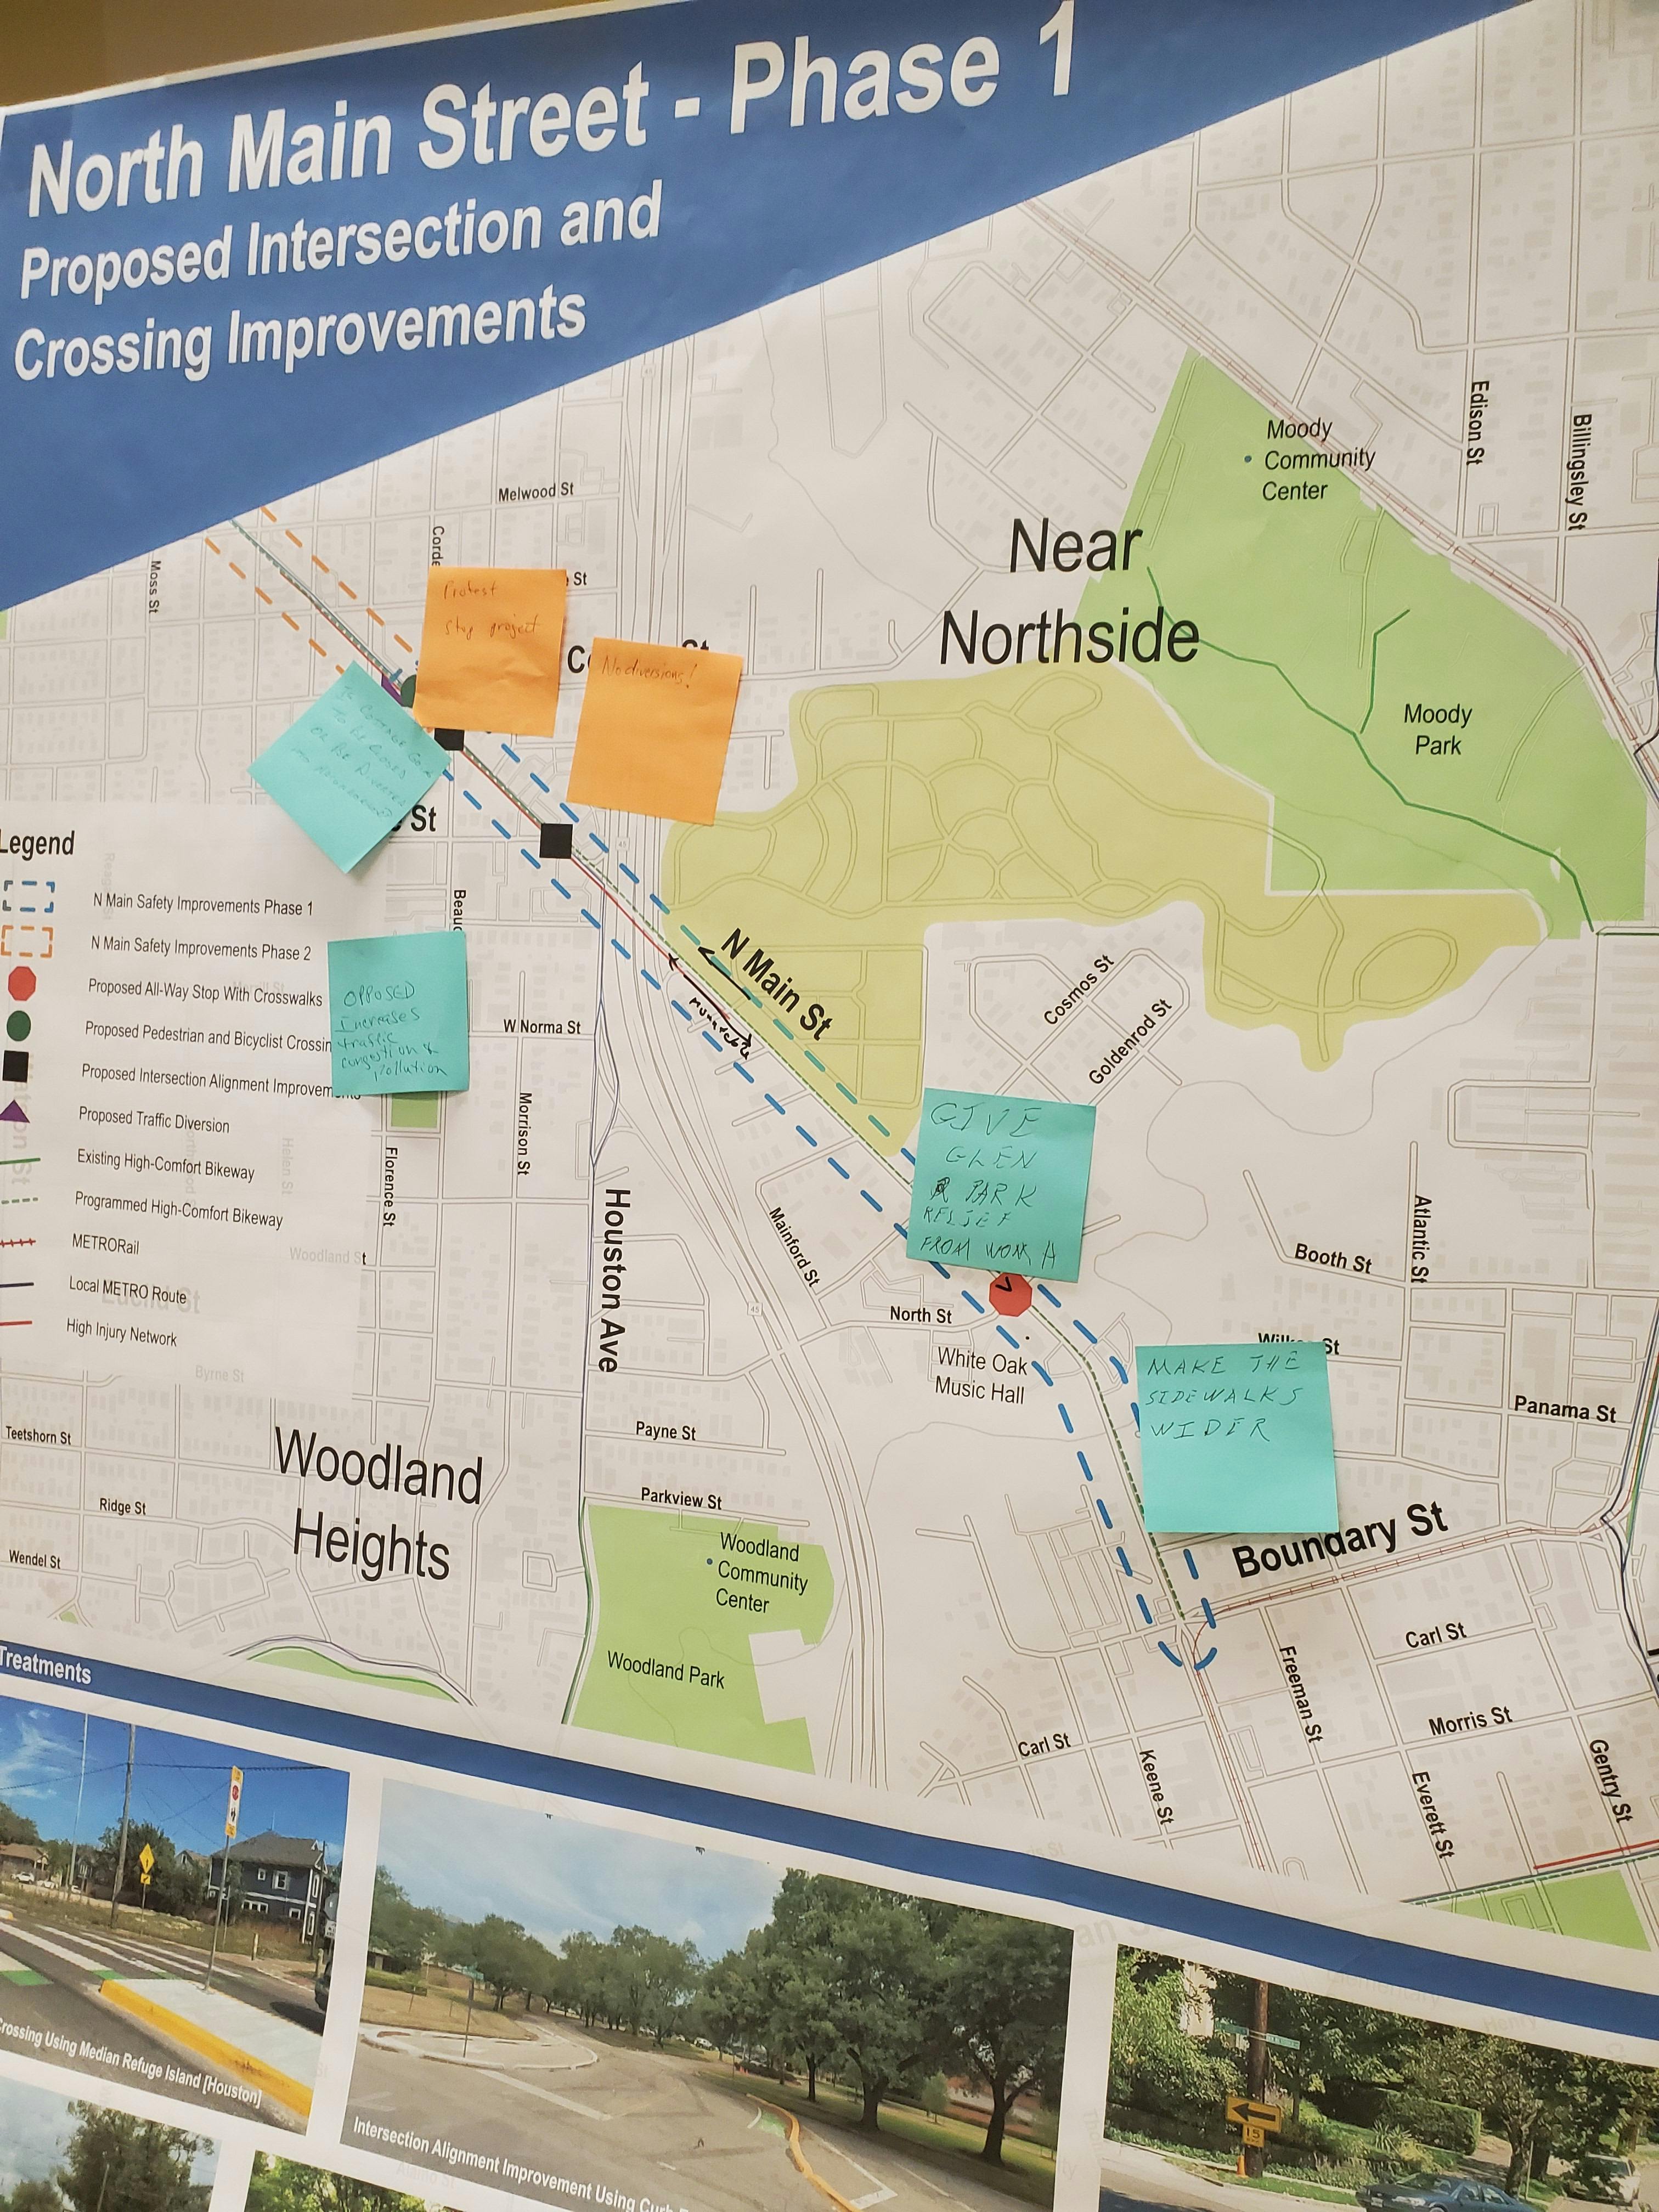 Proposed Intersecton and Crossing Improvements Phase 1 Posterboard